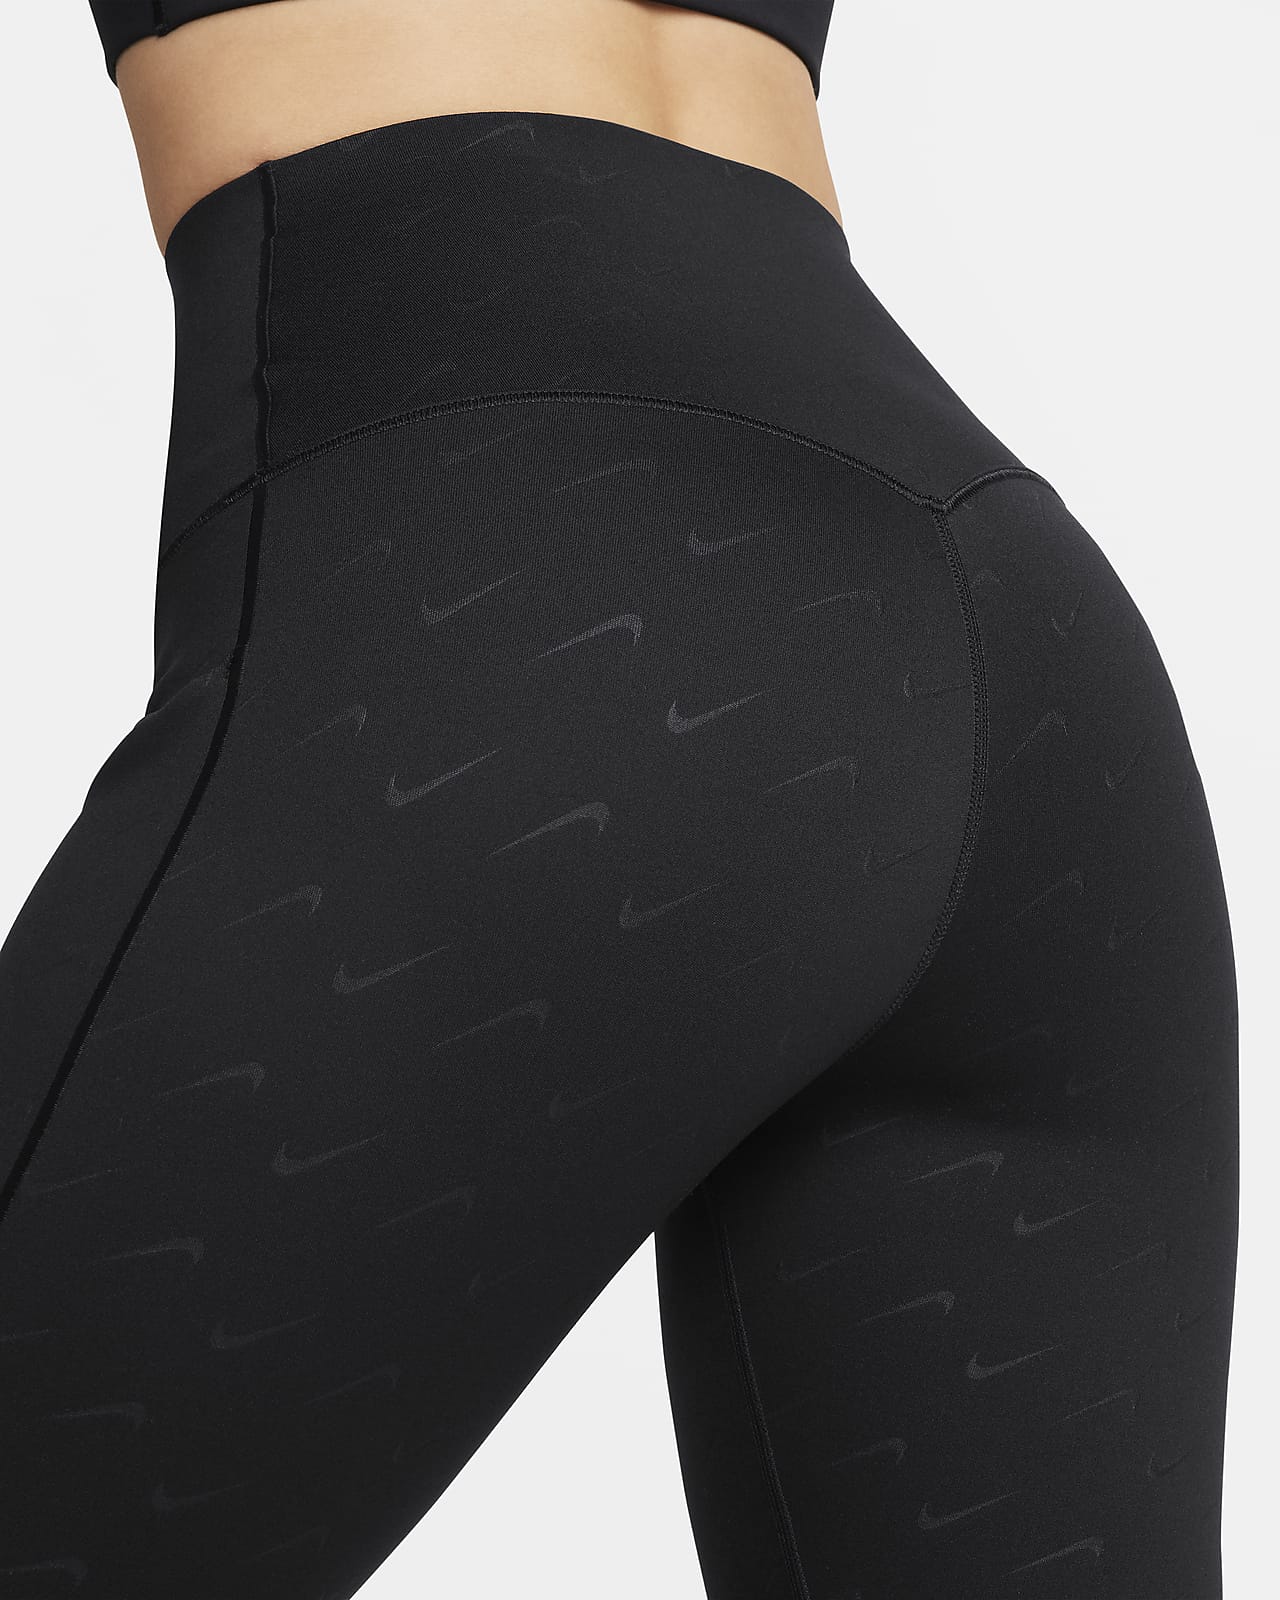 Nike Leggings Are 40% off Just in Time for Your 2019 Resolutions